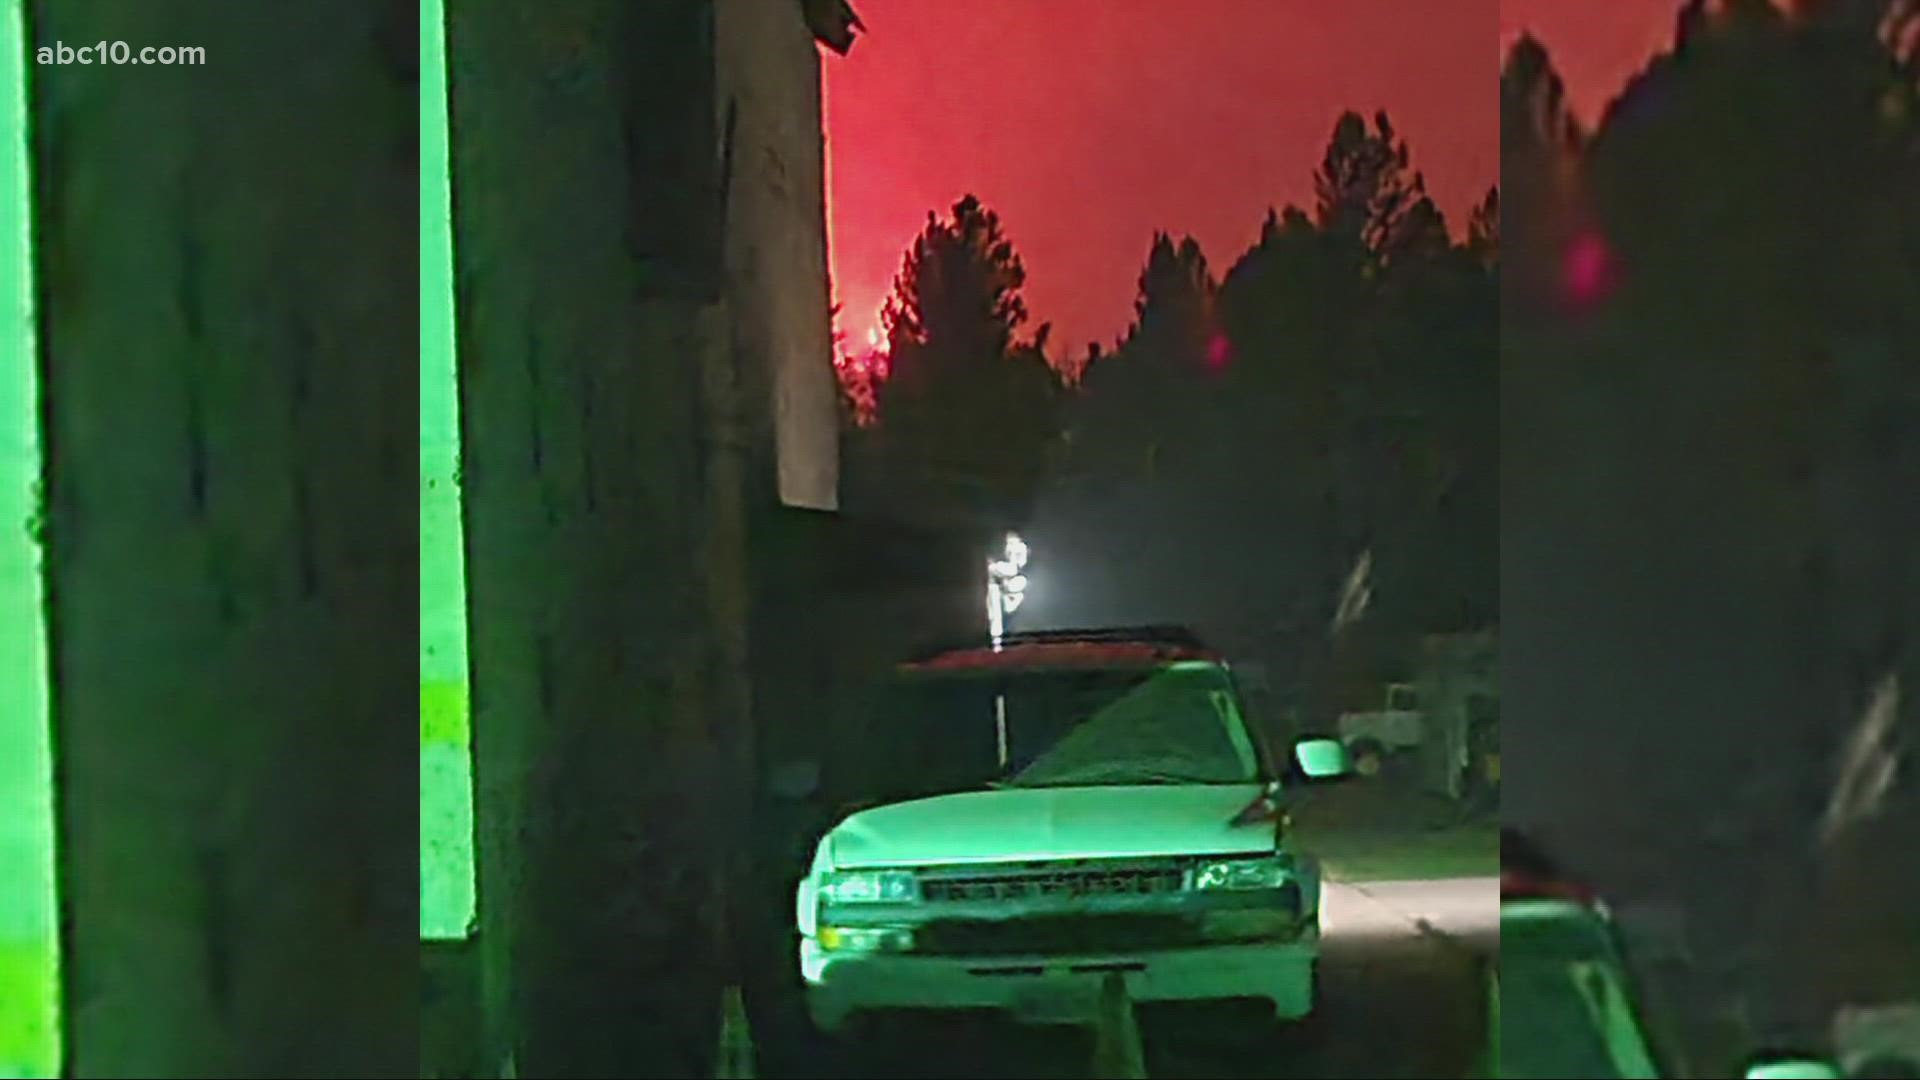 The Dixie Fire gave some challenges for firefighters on Monday, prompting evacuation orders for Greenville in Plumas County.